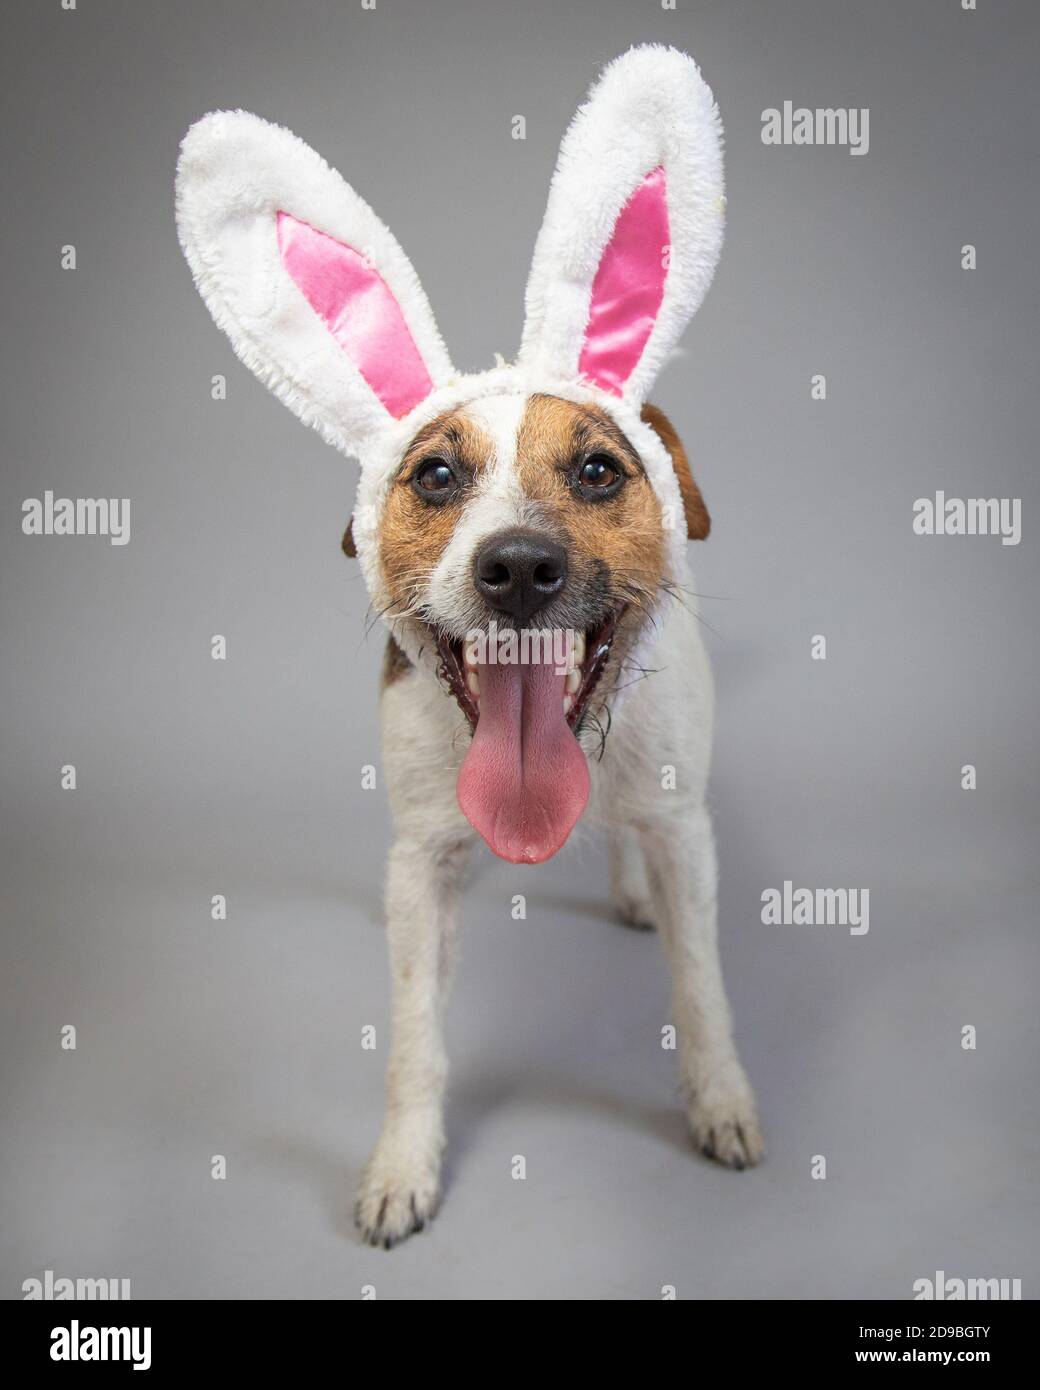 Portrait of a jack russell wearing bunny ears Stock Photo